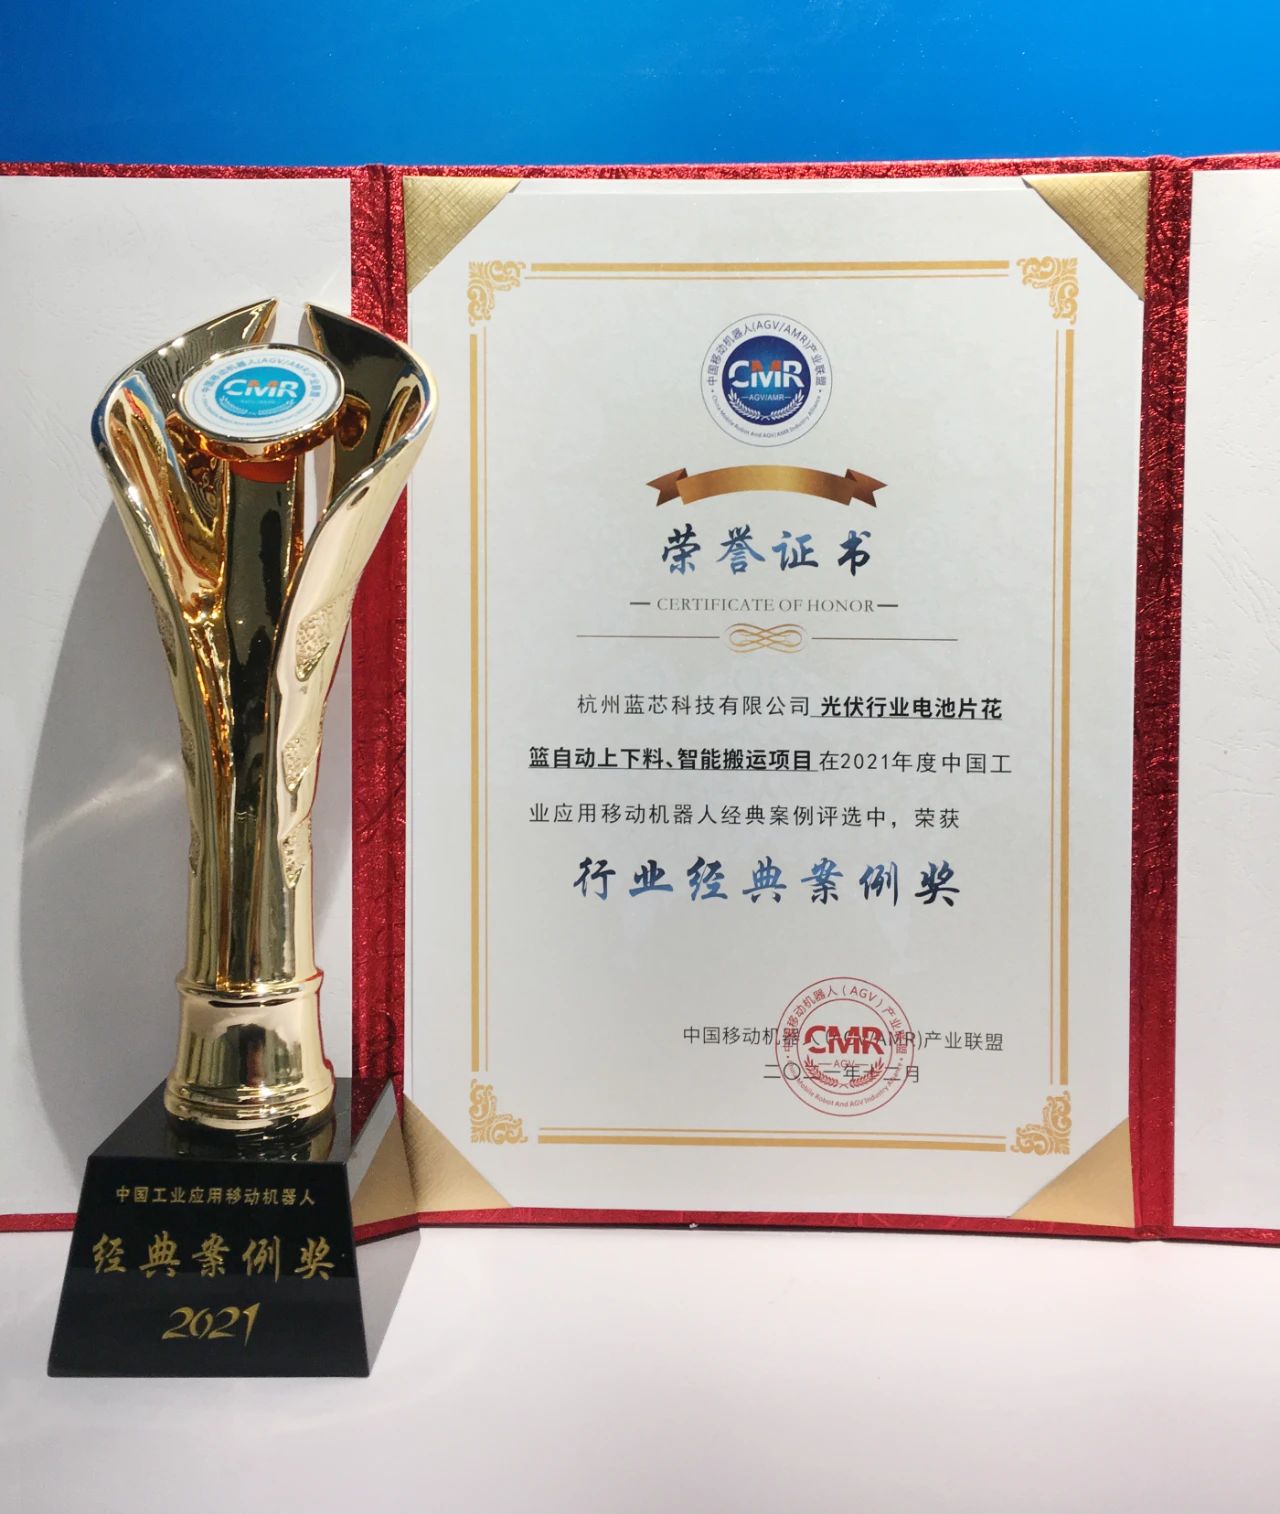 The logistics case of photovoltaic smart production line won the industry classic case award.jpg